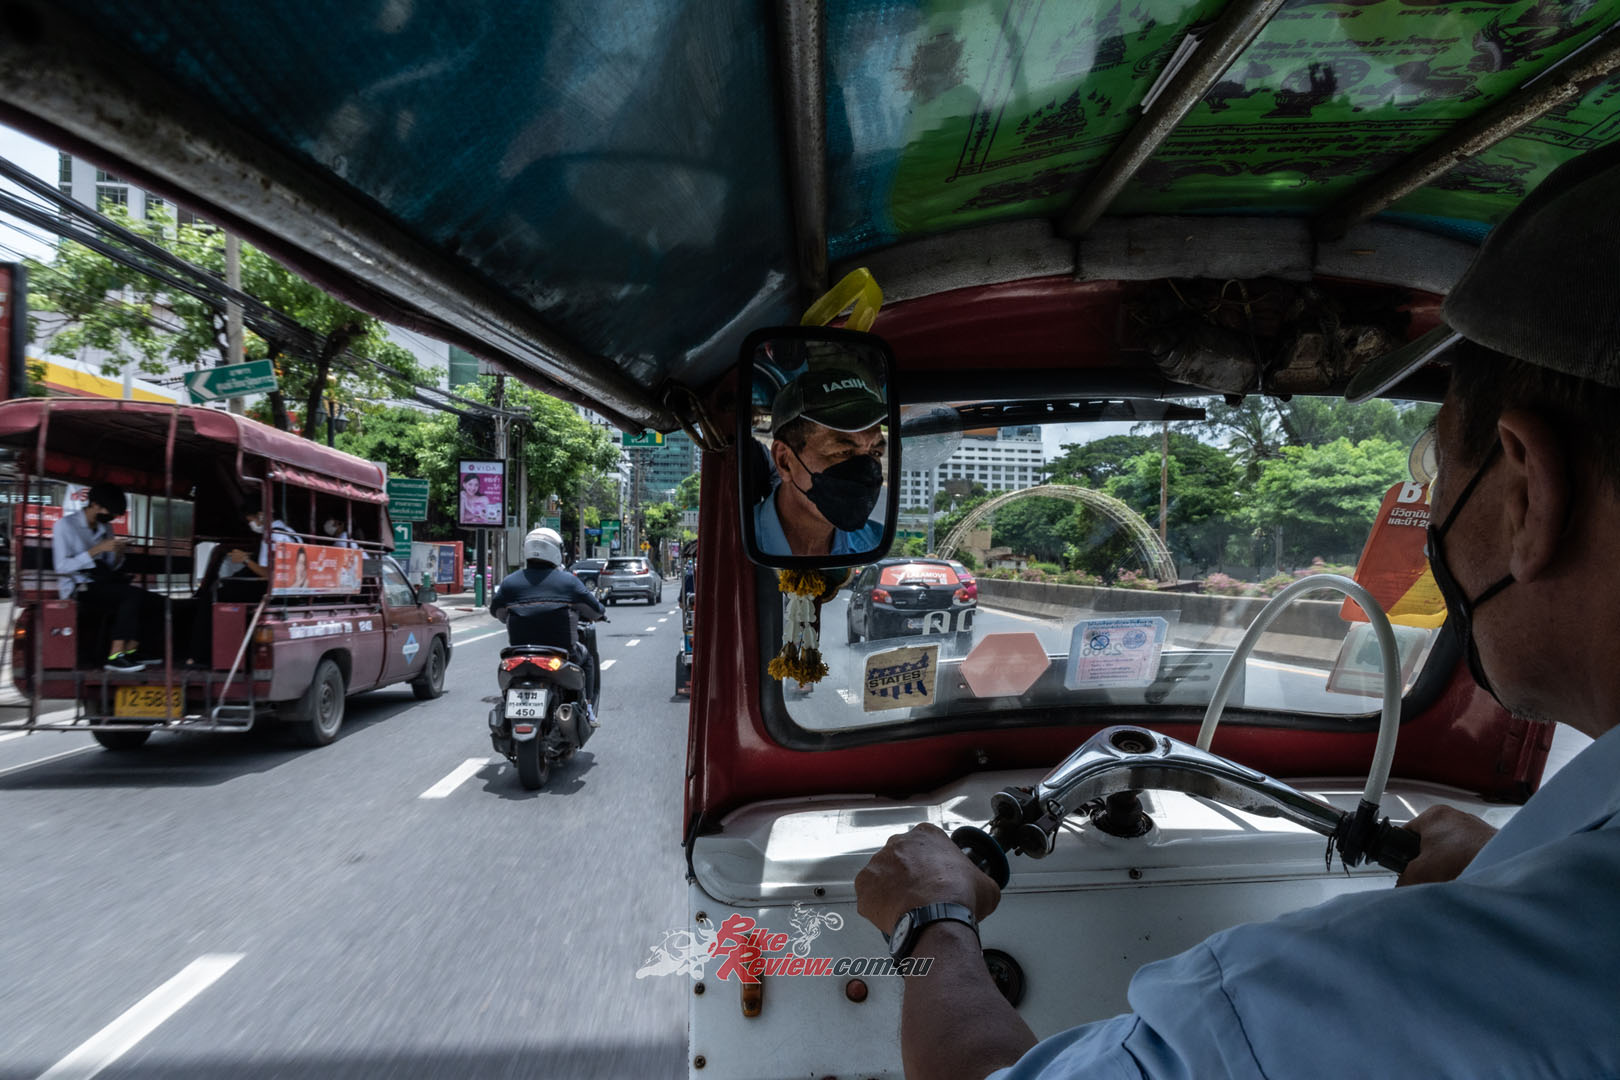 Partying, riding and experiencing Thailand for the first time is always an eye-opening experience to the chaos everyday commuting is in Southeast Asia.